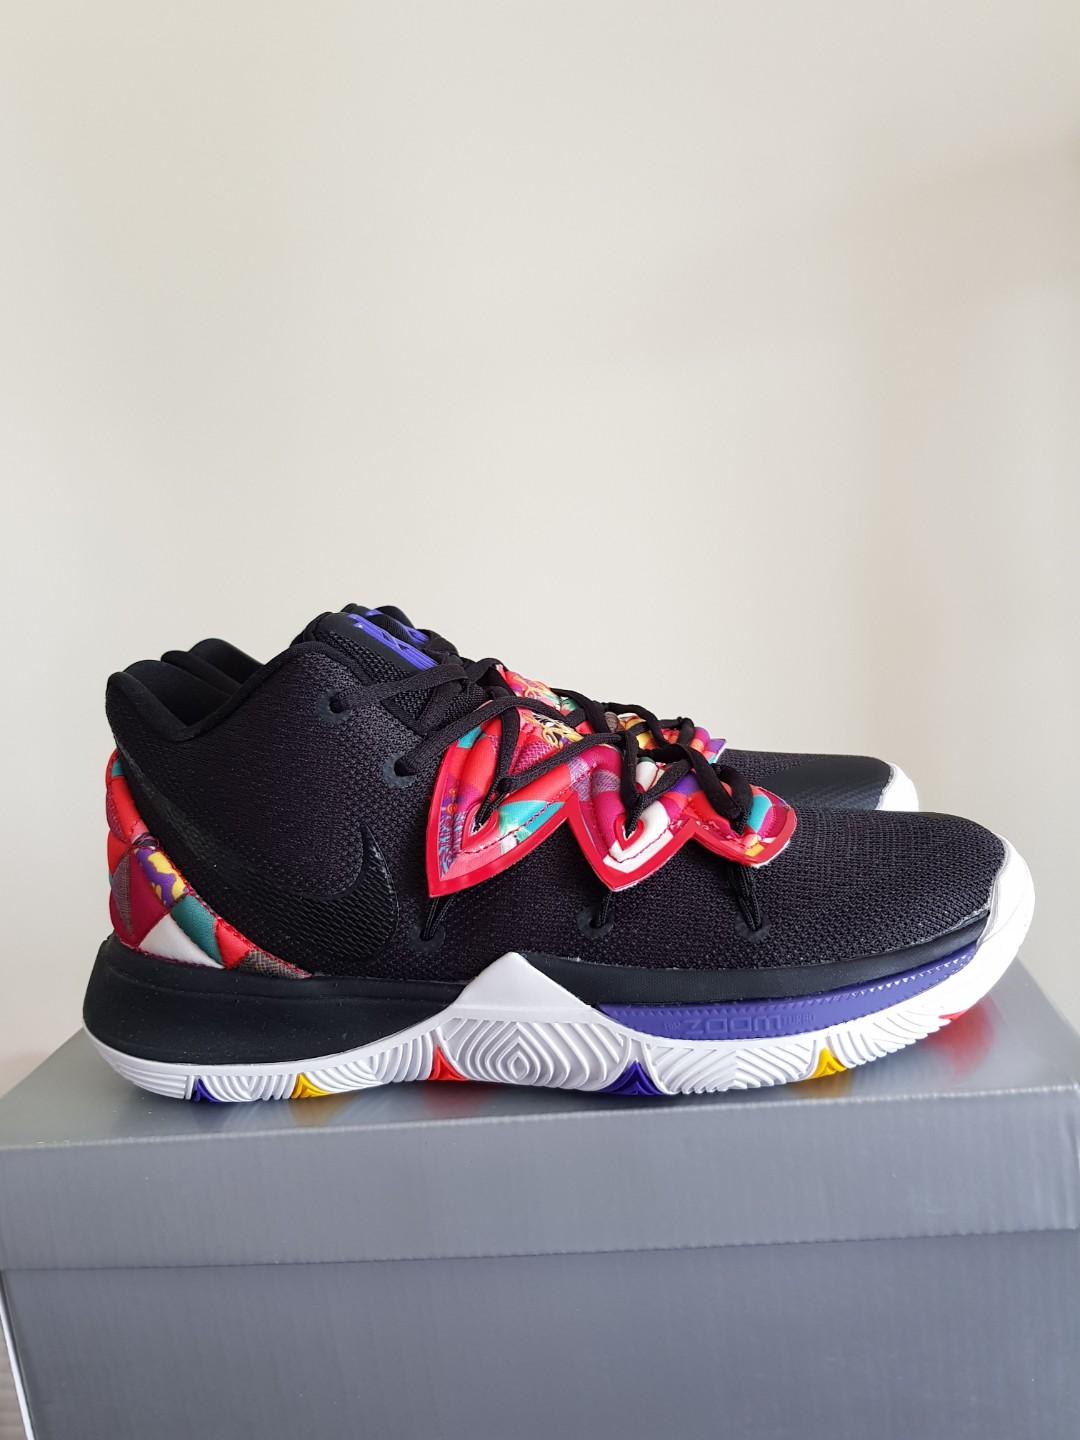 Nike Kyrie 5 BHM Black History Month White Mtlc Red Bronze